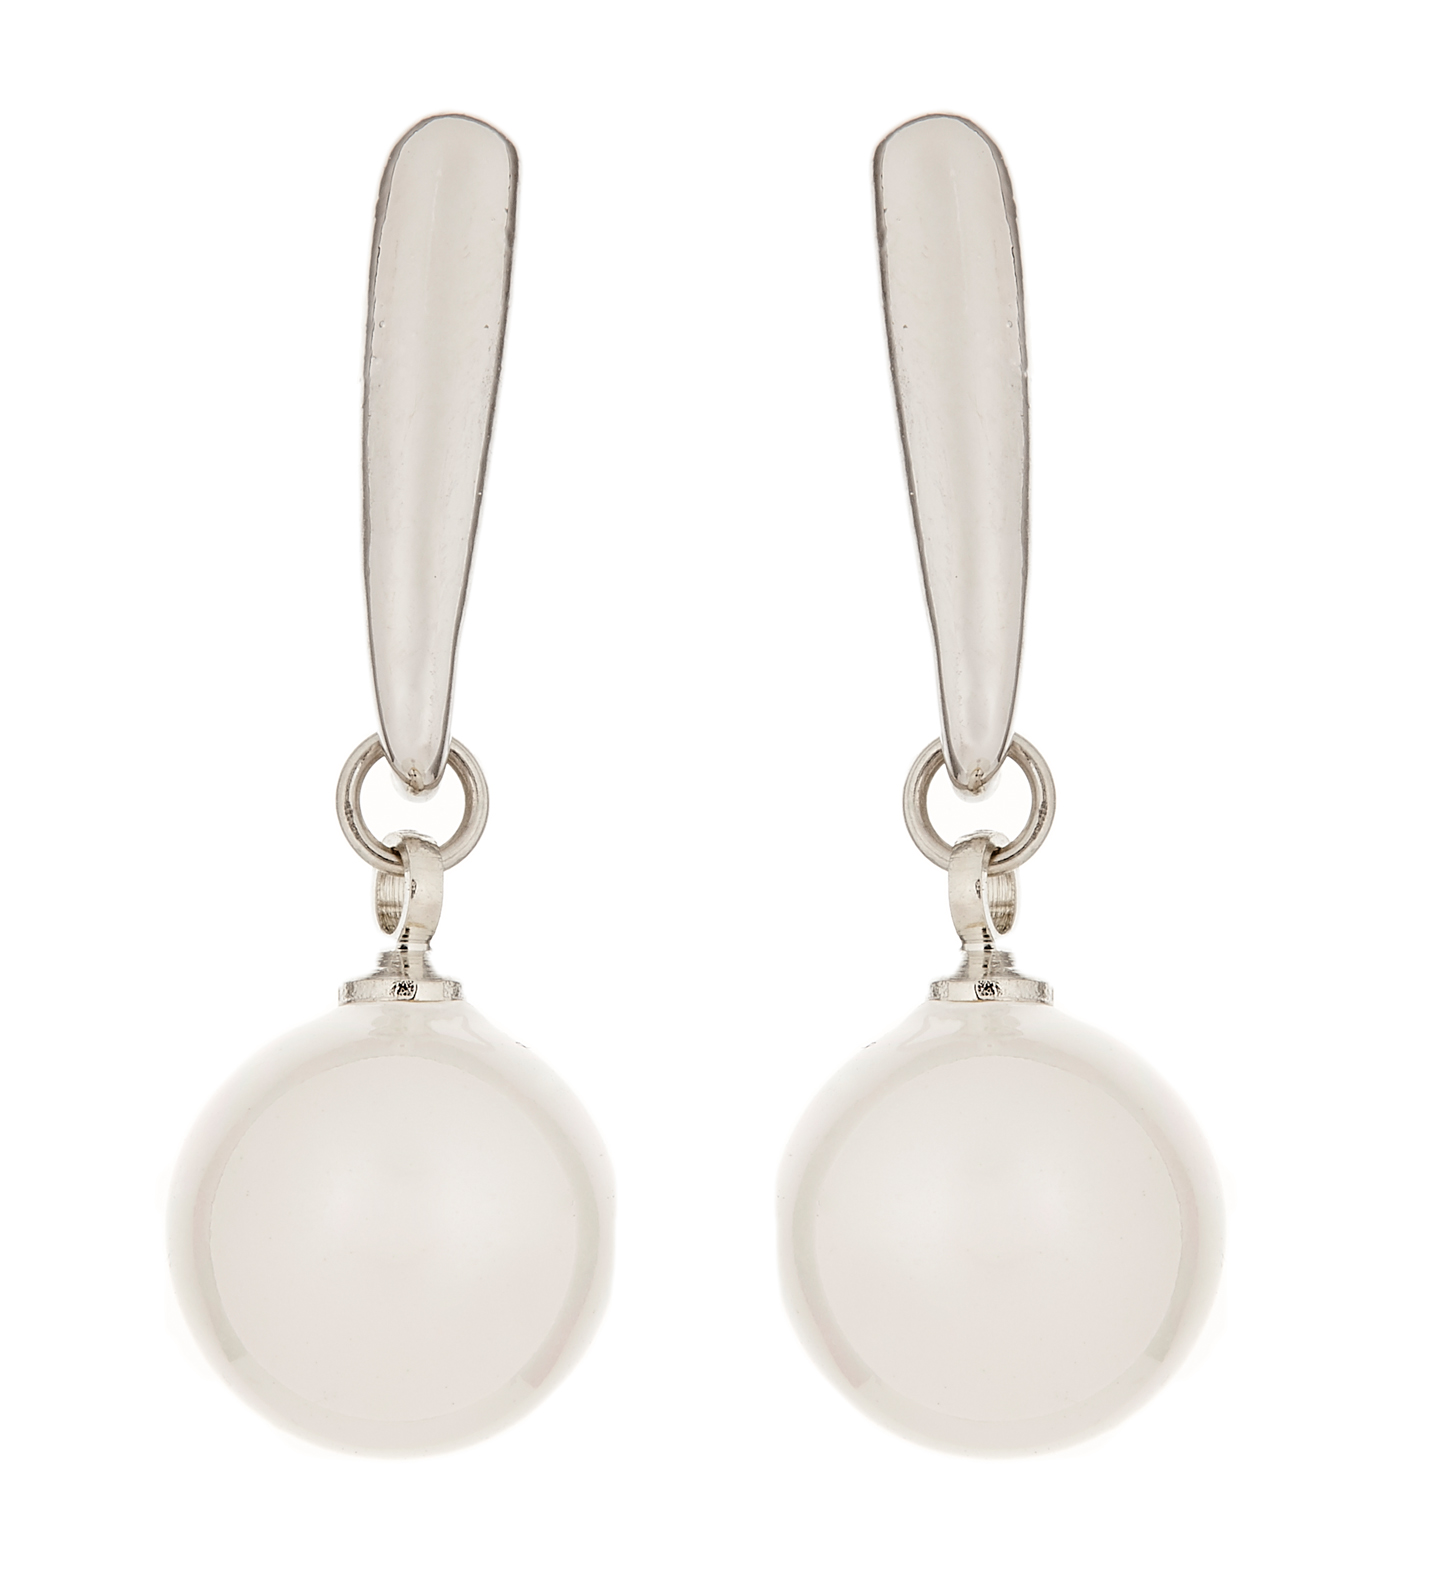 Clip On Earrings - Carey - silver earring with a pearl